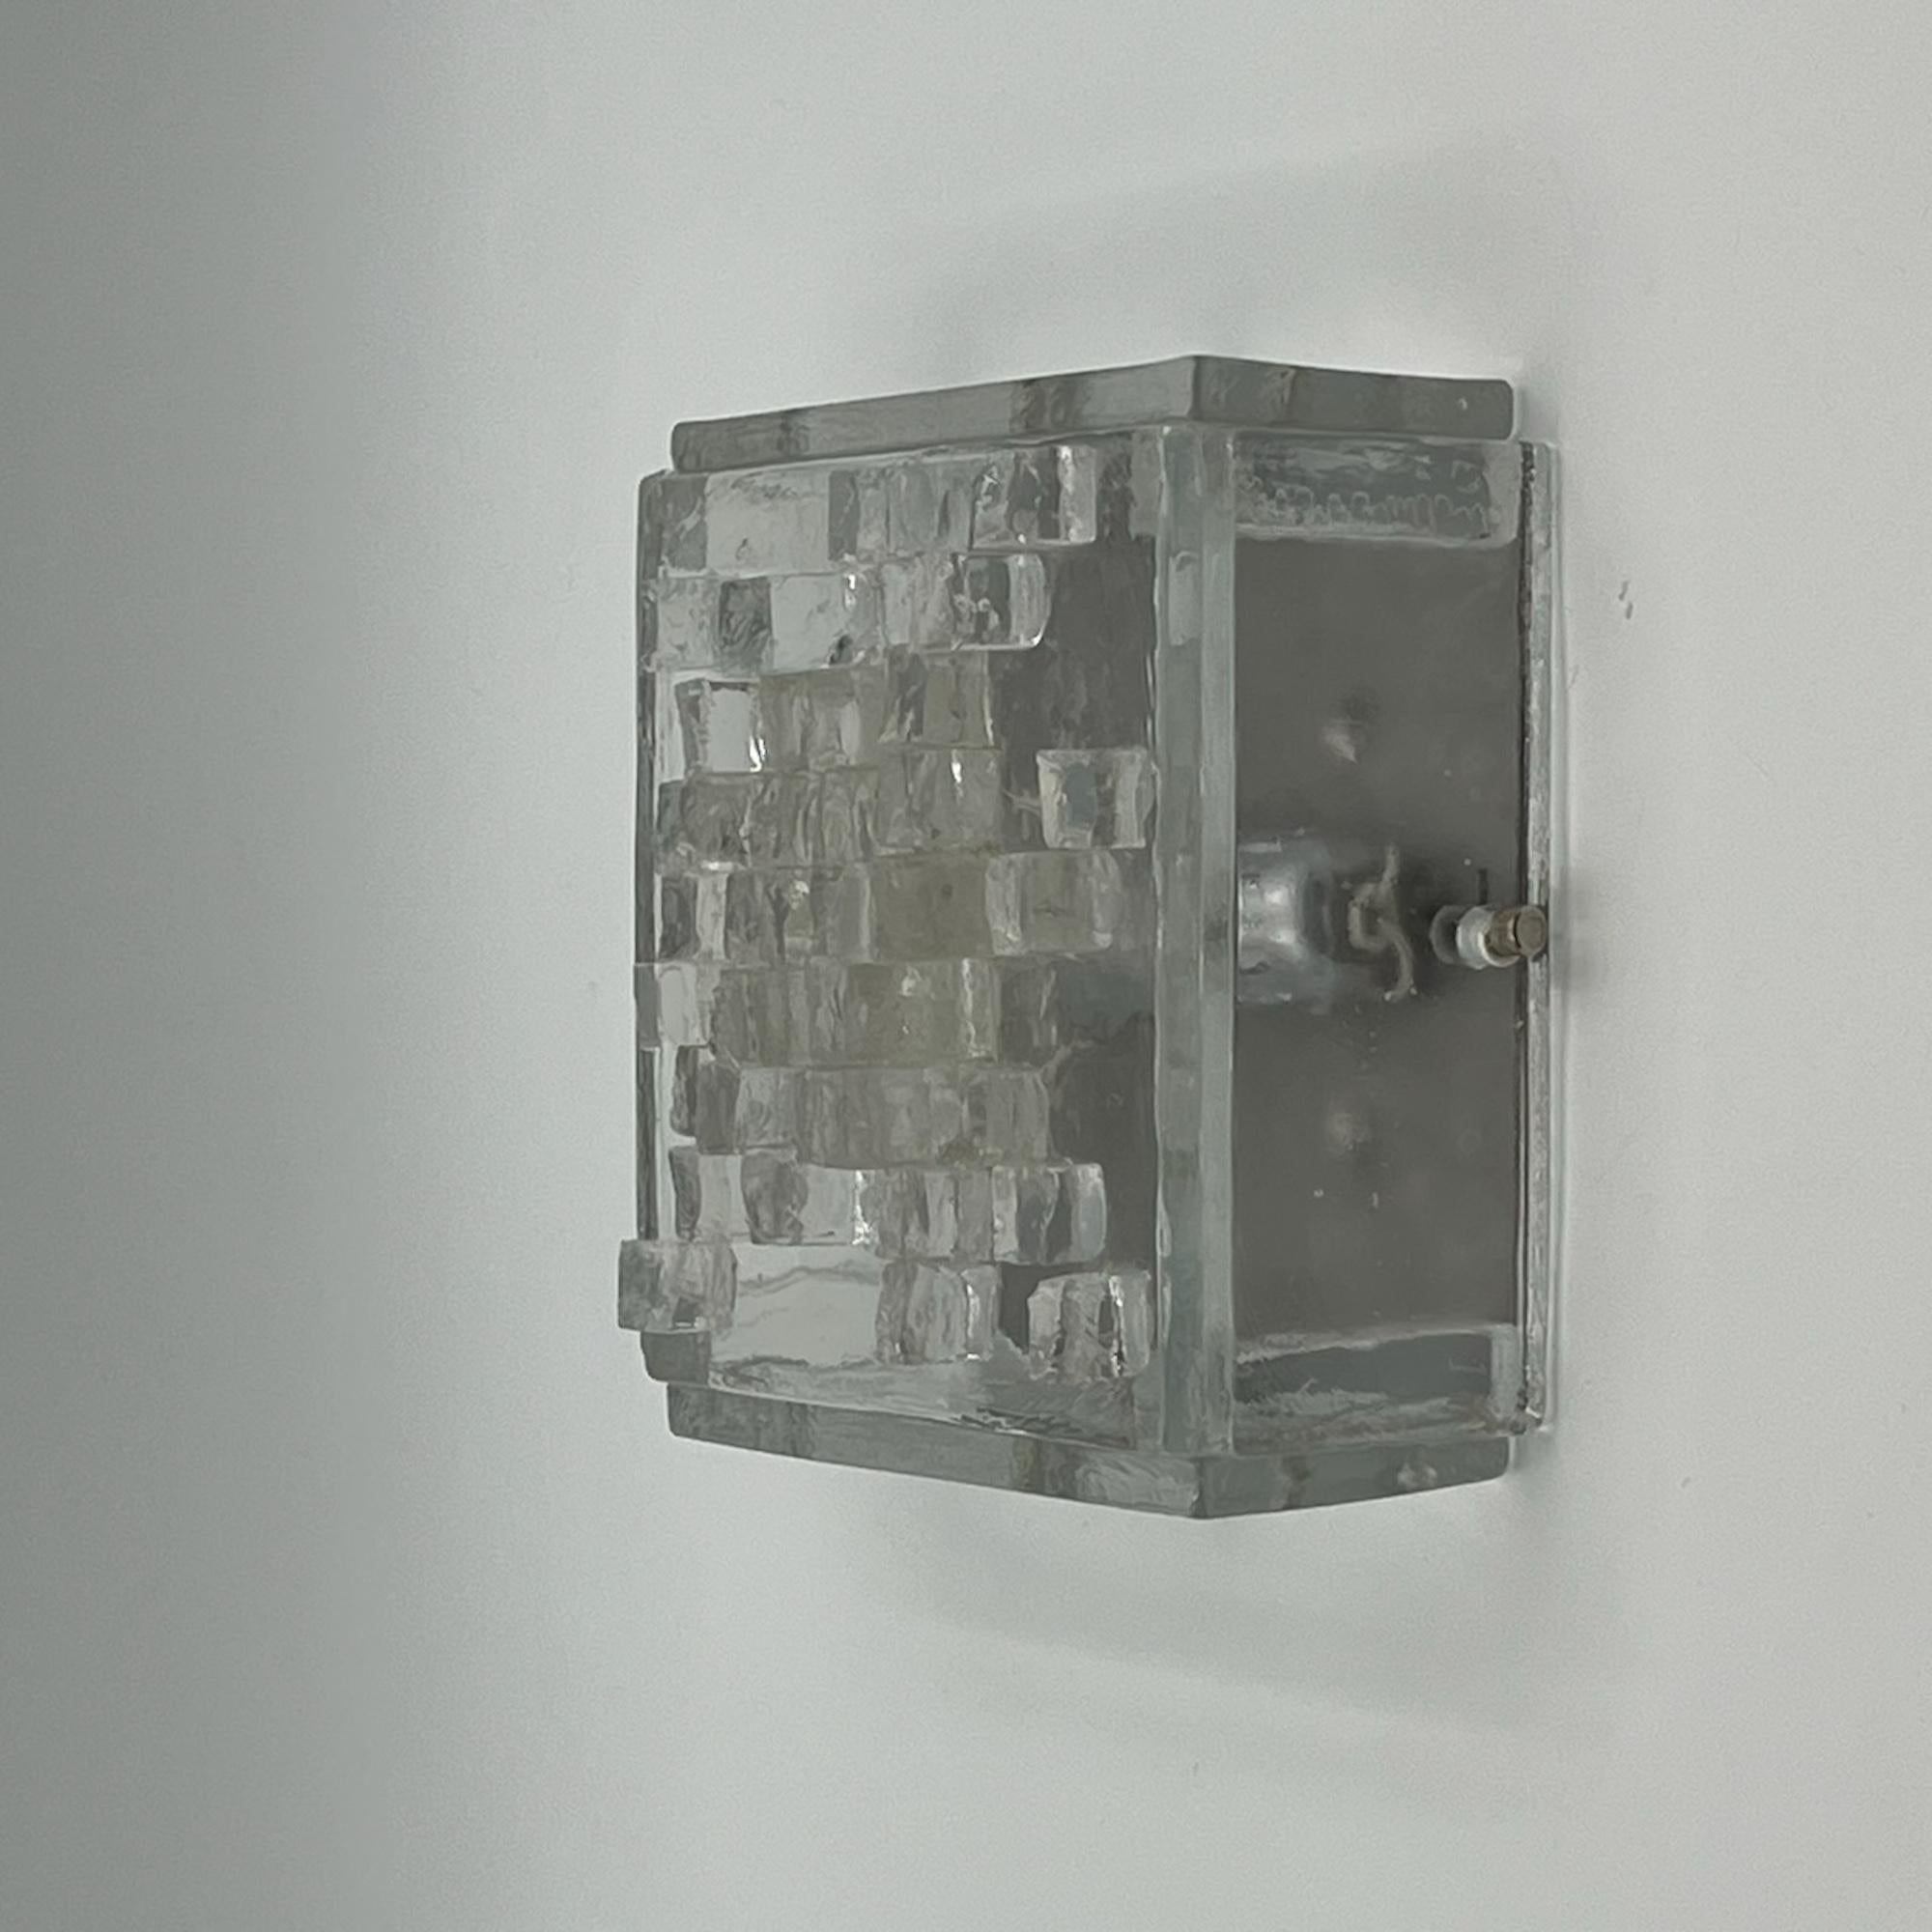 Immerse yourself in the captivating allure of vintage design with the rare and exquisite Poliarte 70s brutalist lamp. Handmade by the iconic artisans of Verona, Italy, this stunning wall or ceiling light is a true testament to the craftsmanship and